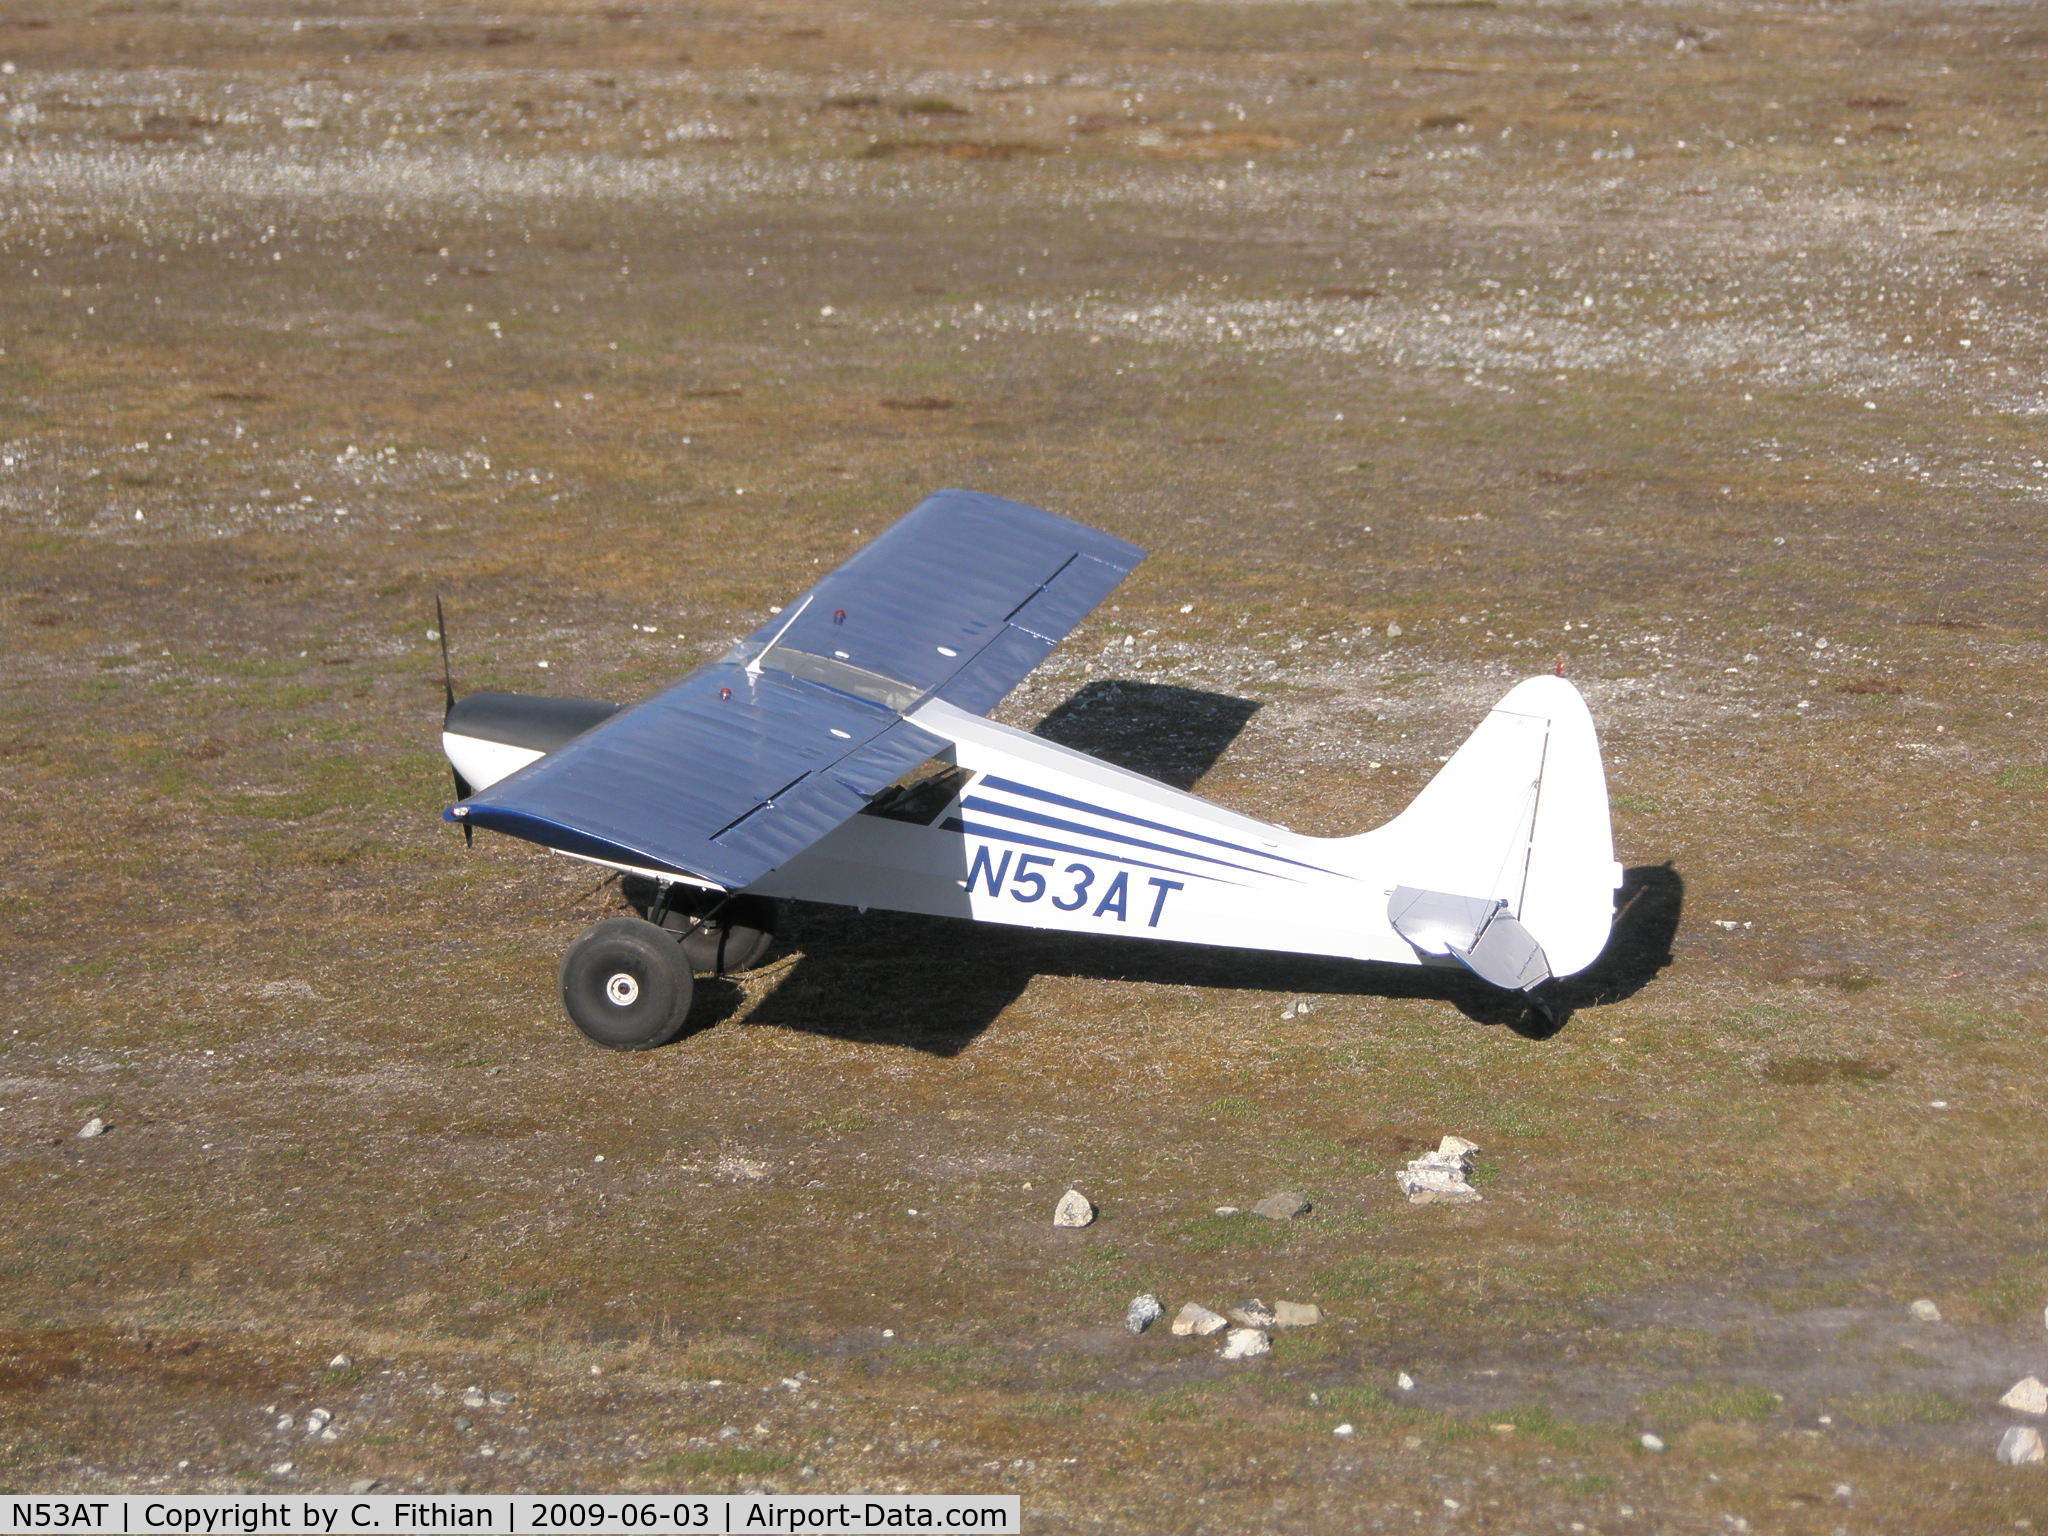 N53AT, 1976 Arctic Aircraft Co Inc S-1B2 C/N 1004, N53AT, upper Susitna River in the Talkeetna Mountains.